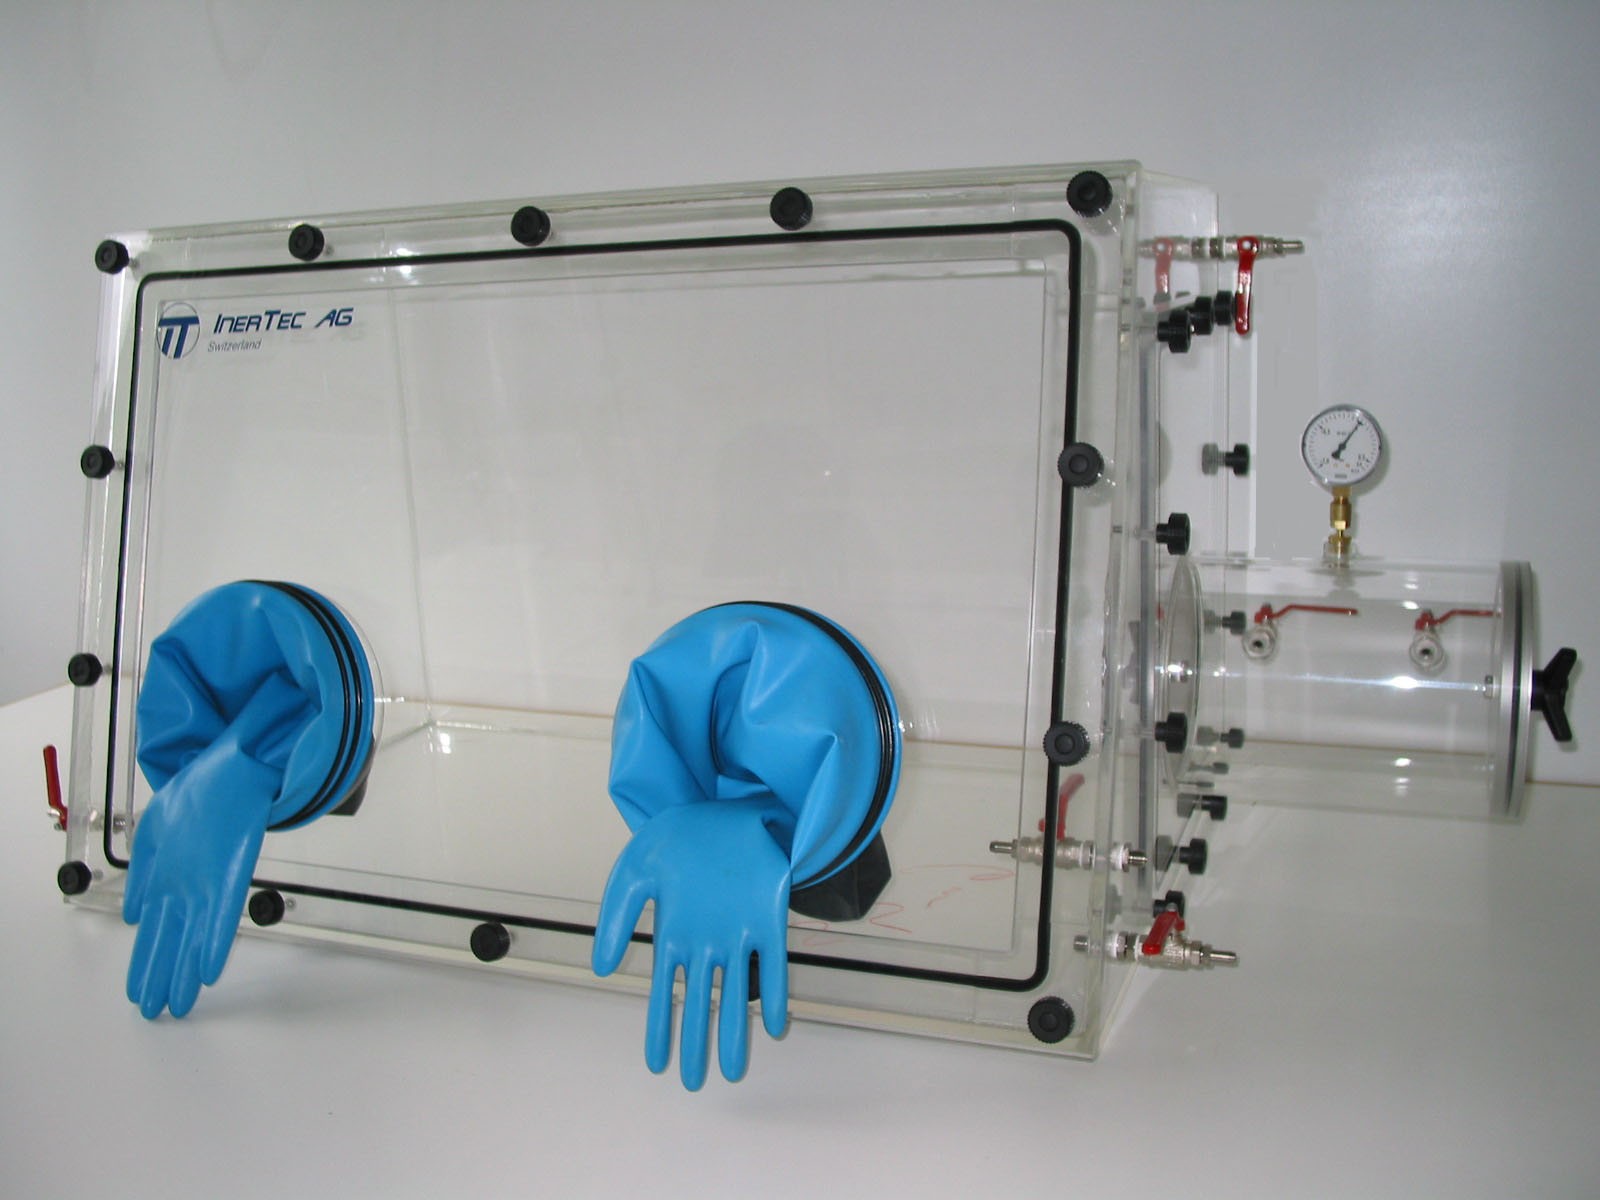 Glovebox made of acrylic&gt; Gas filling: by hand, front design: swivels upwards, side design: round vacuum lock, control: humidity display